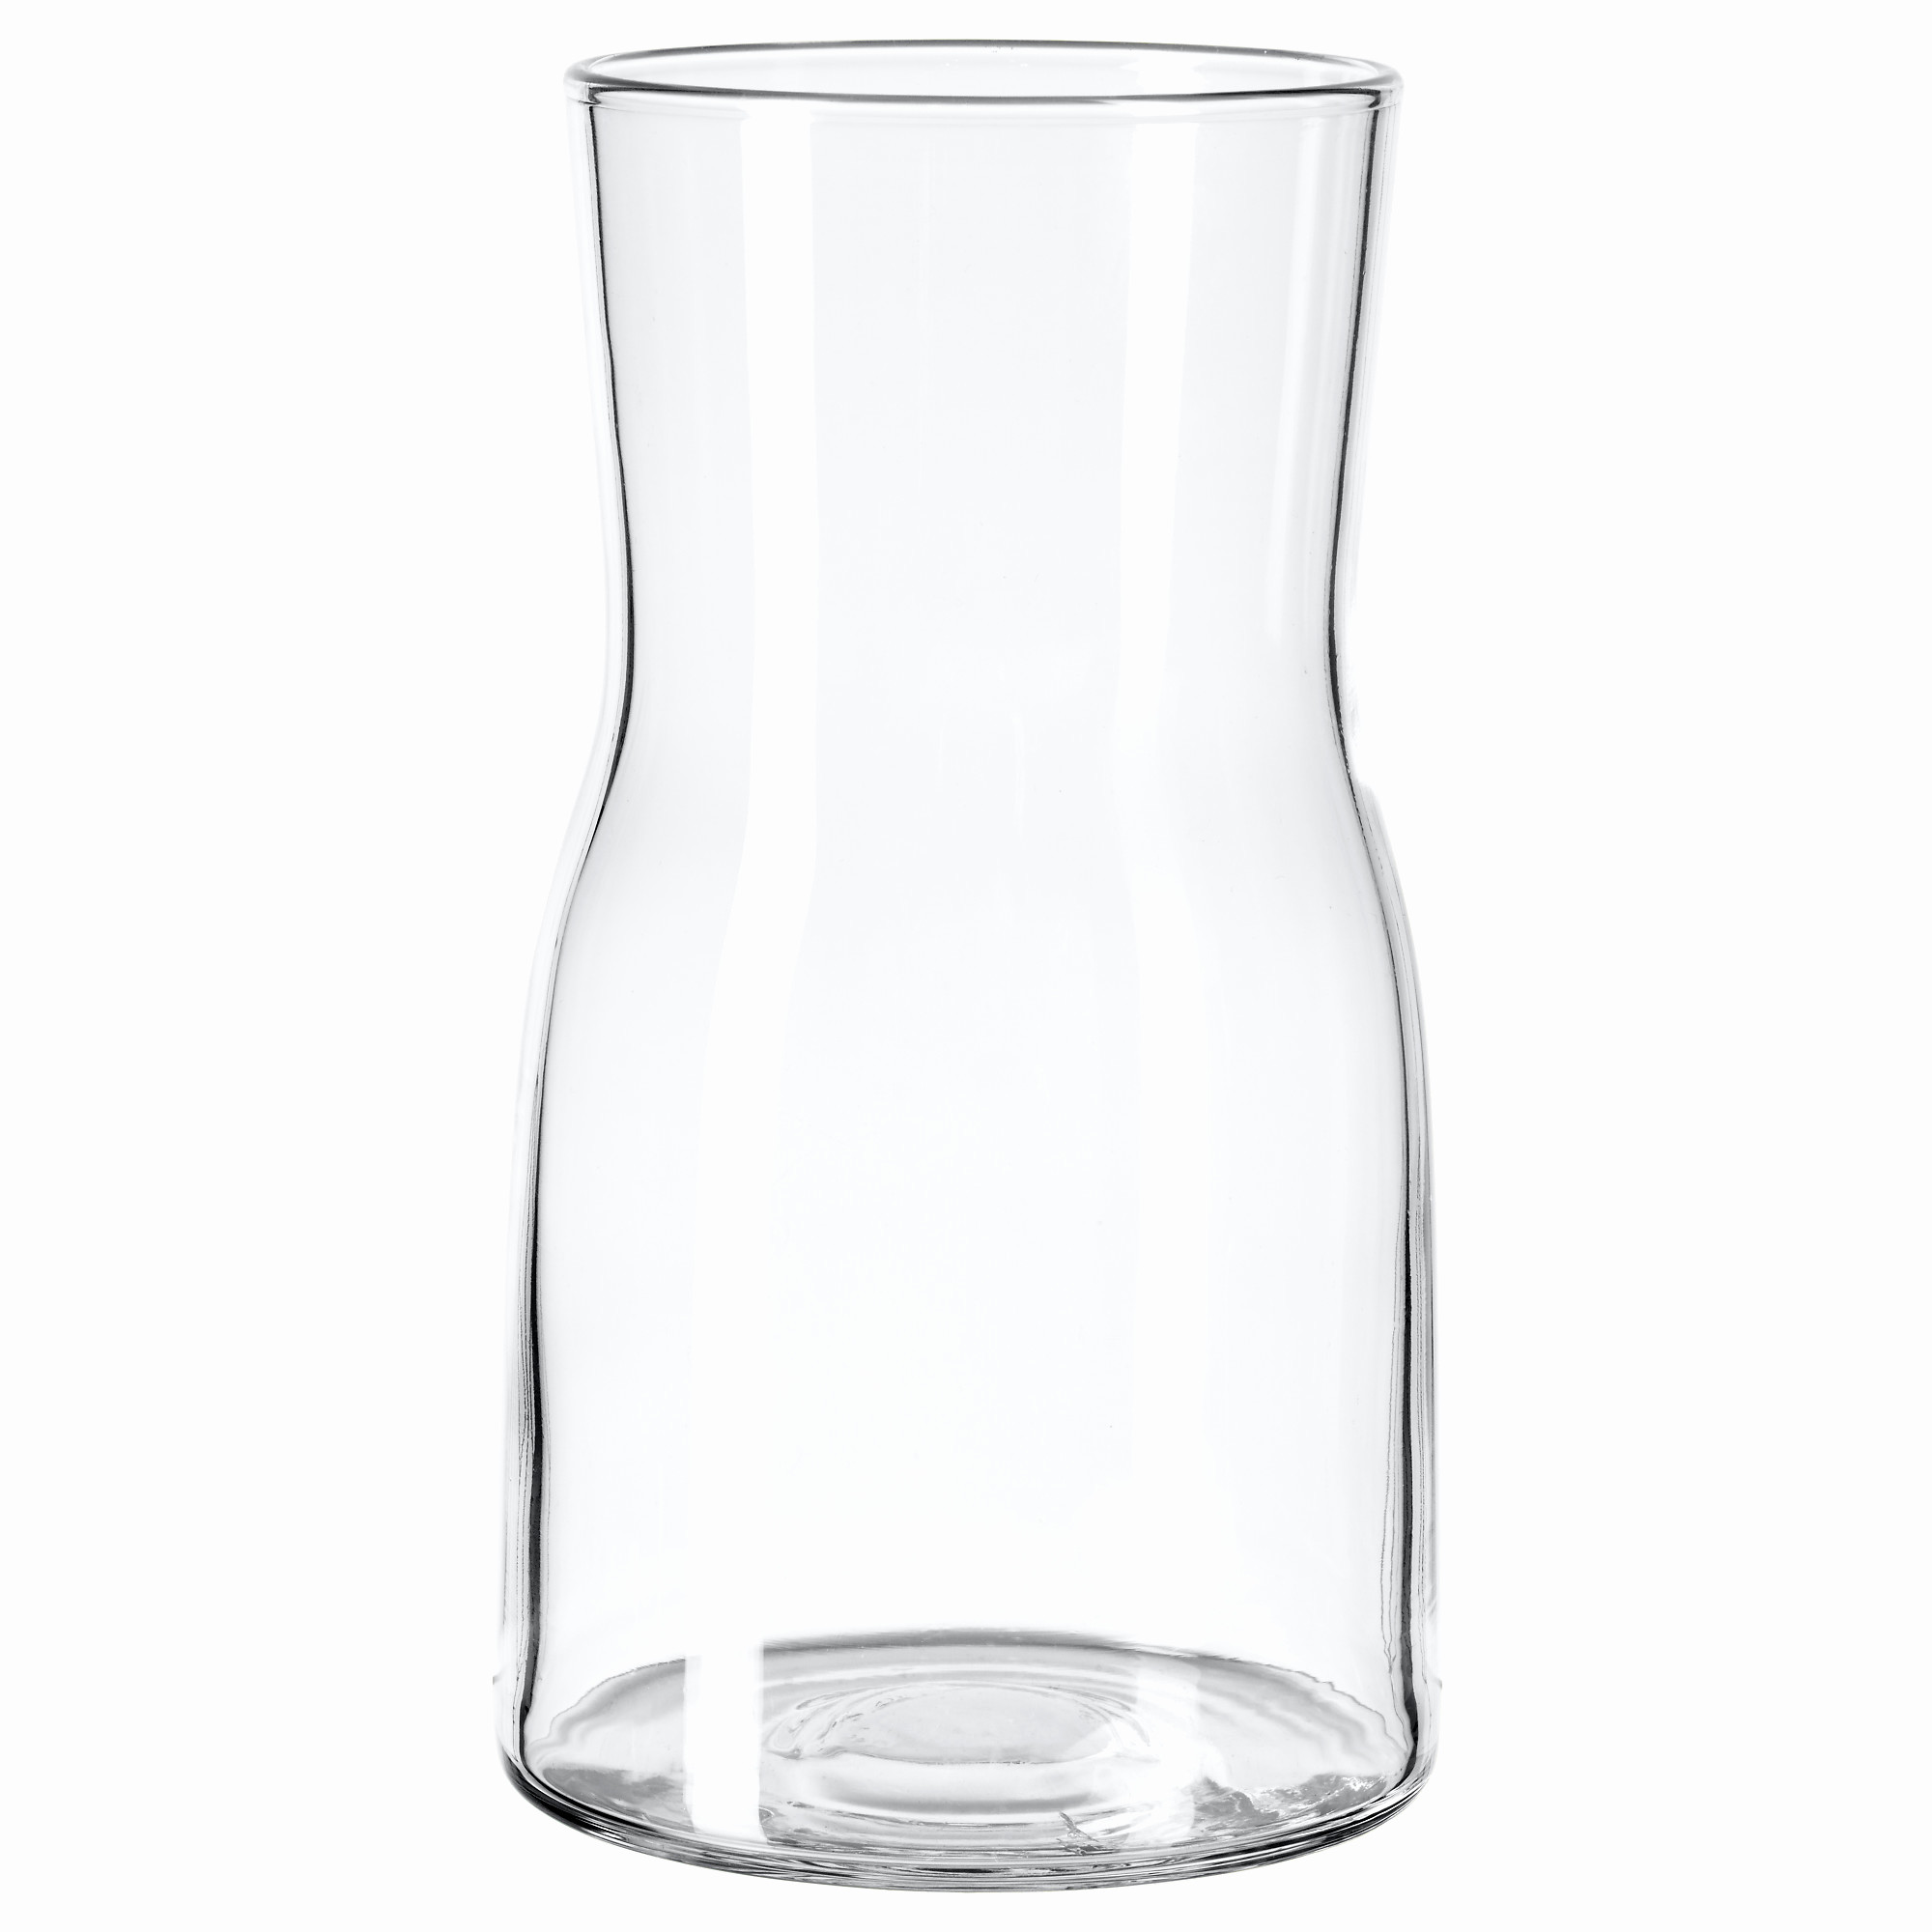 Extra Large Glass Vases Of Vase Martini Casa Stemless Martini Glasses S Quickshop atelier within Extra Large Glass Vase New Glass Uamp Flower Vases and Bowls Ikea